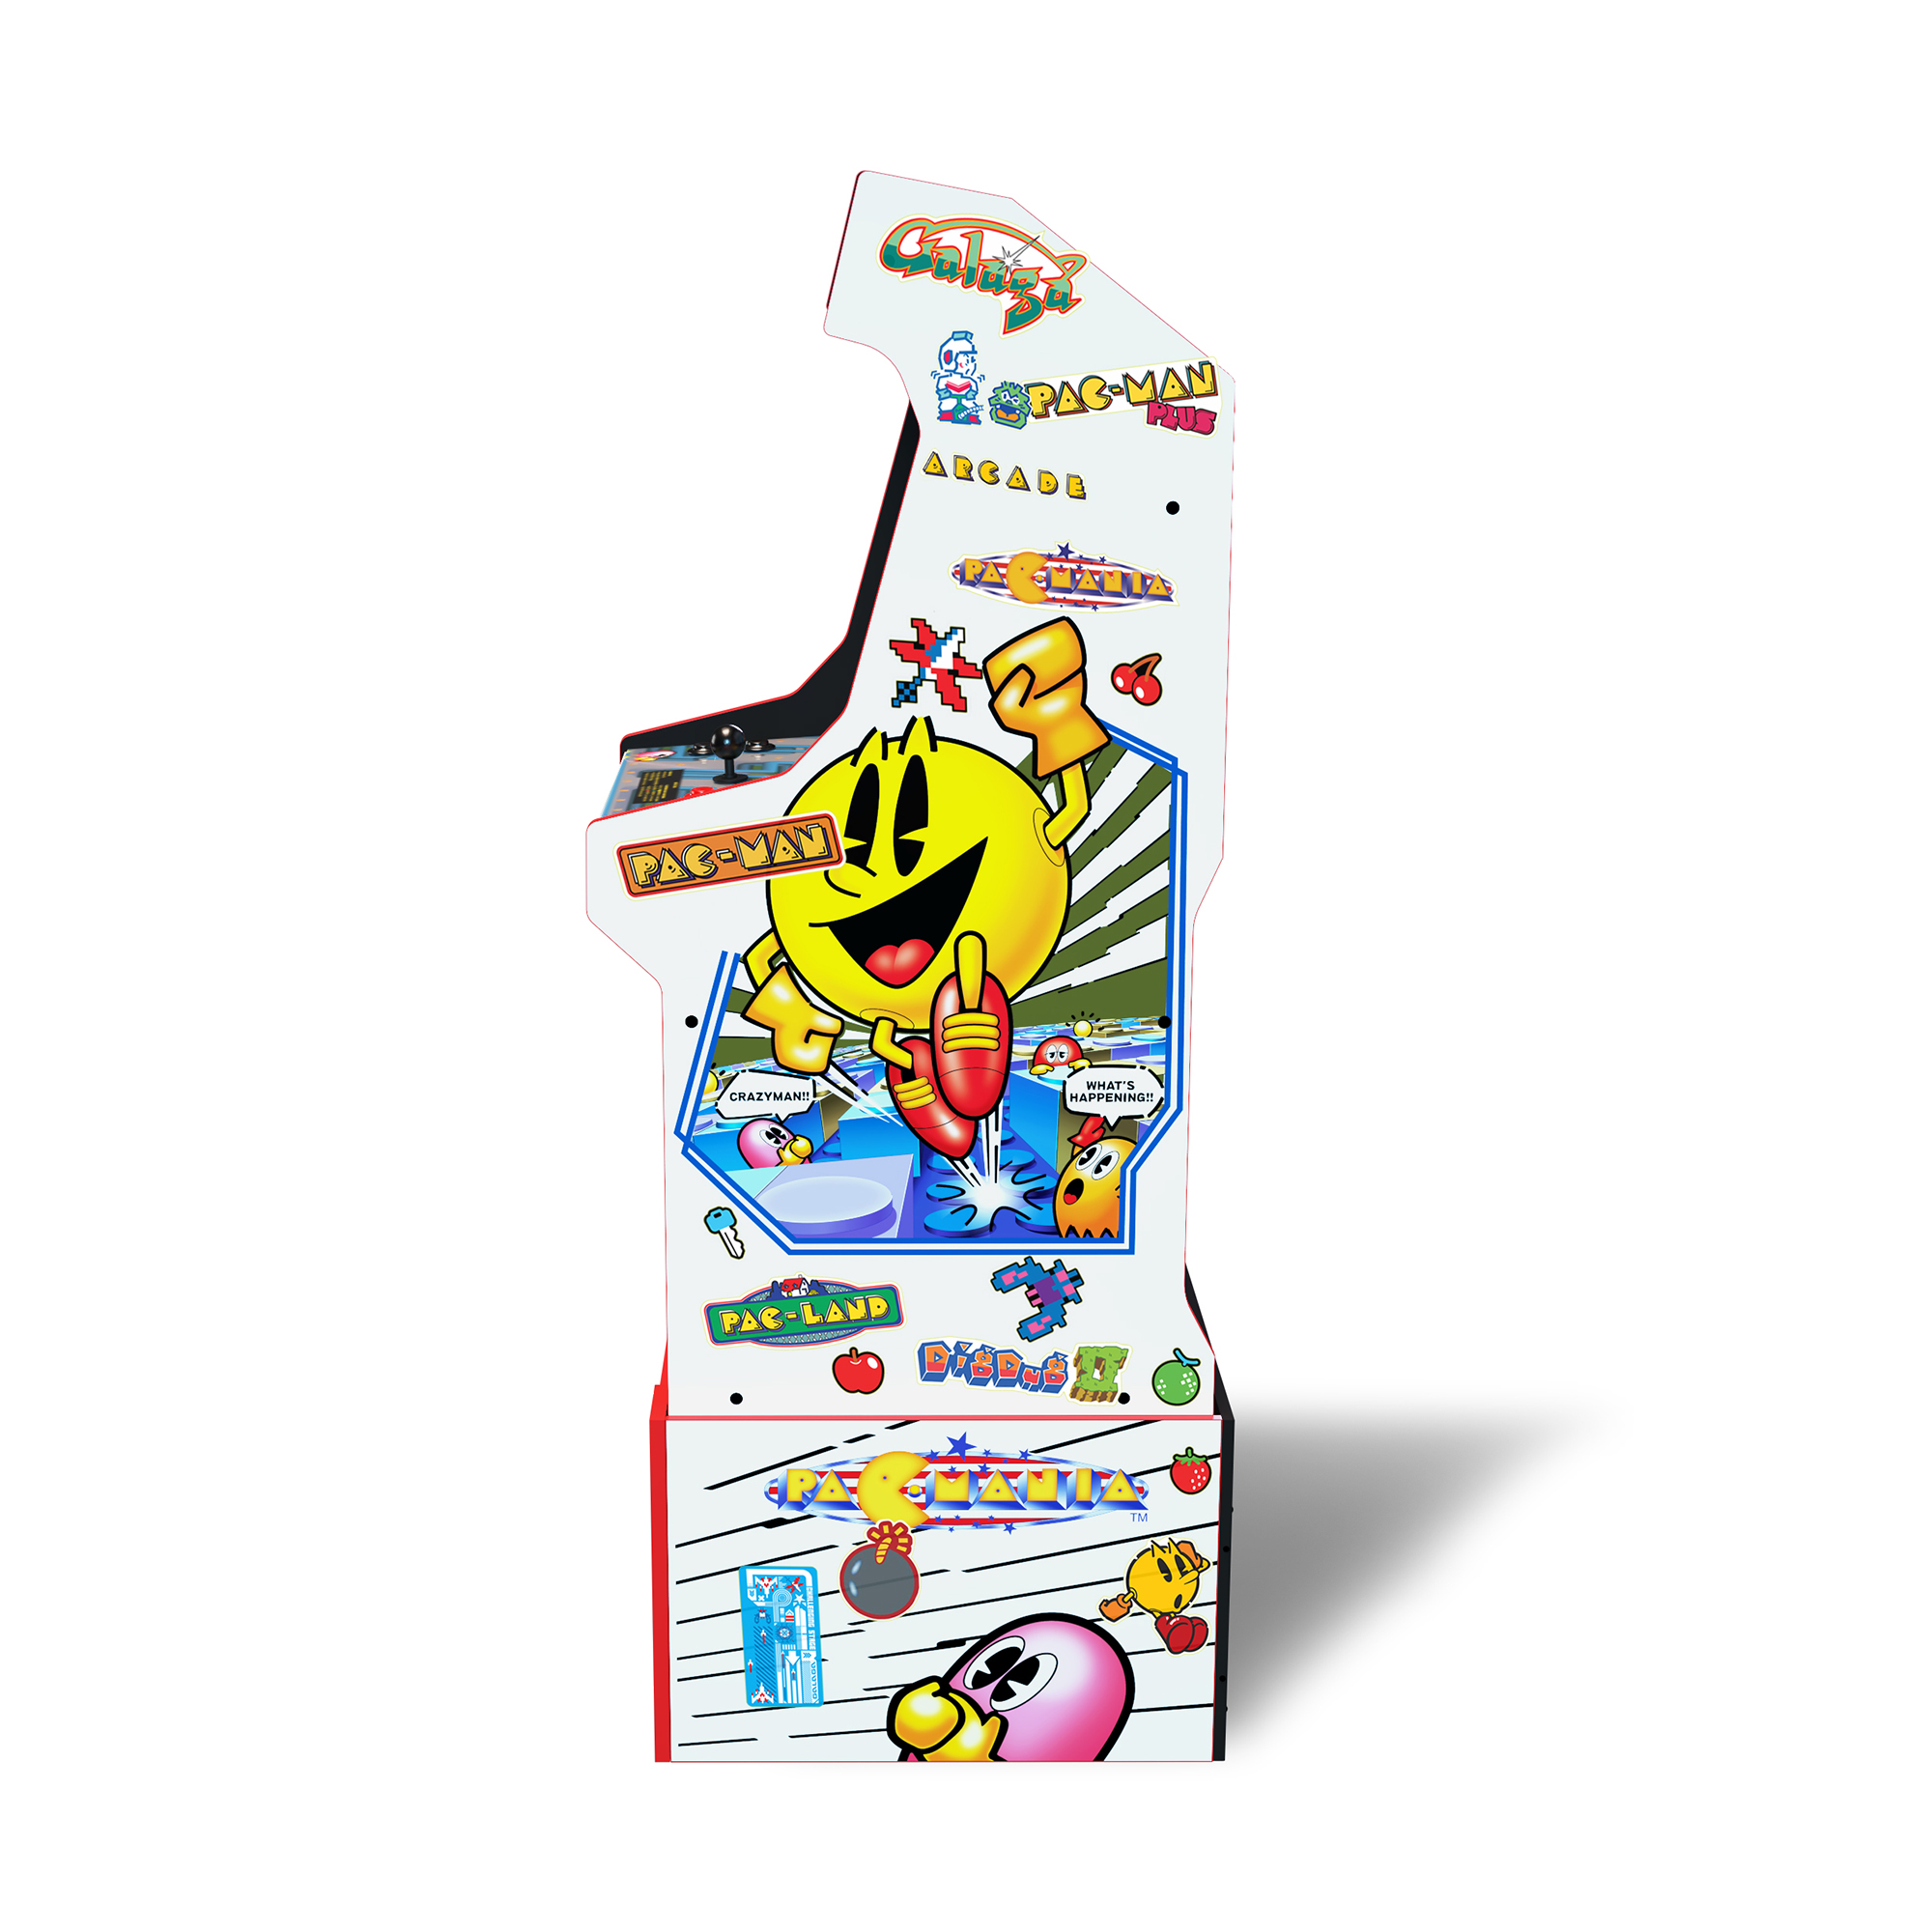 Arcade1UP - 14 Games in 1, PAC-MAN Customizable Video Game Arcade Featuring PAC-MANIA and includes 100 Bonus Stickers - image 3 of 17